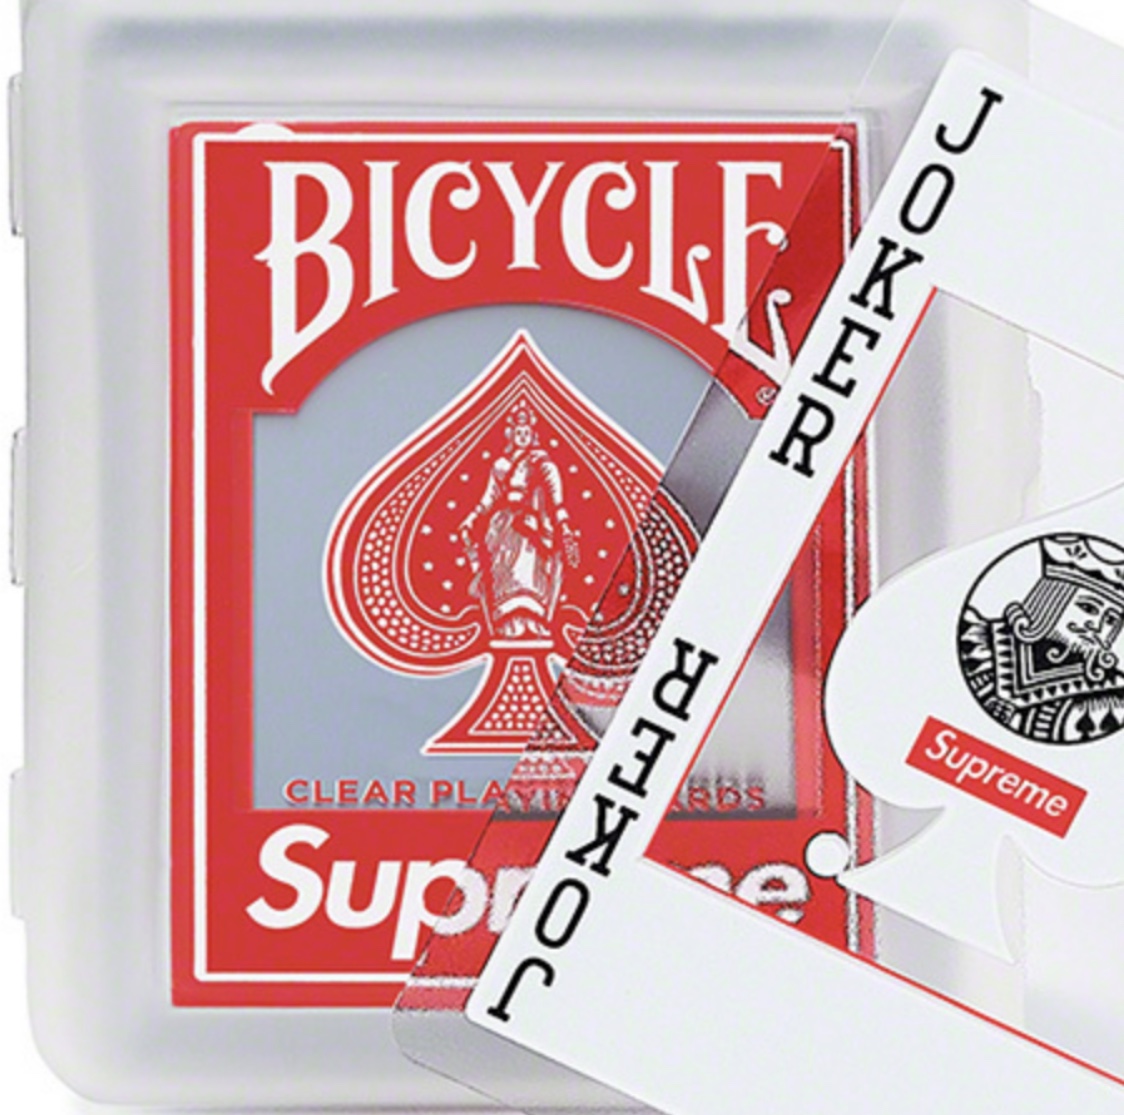 Supreme Bicycle Clear Playing Cards